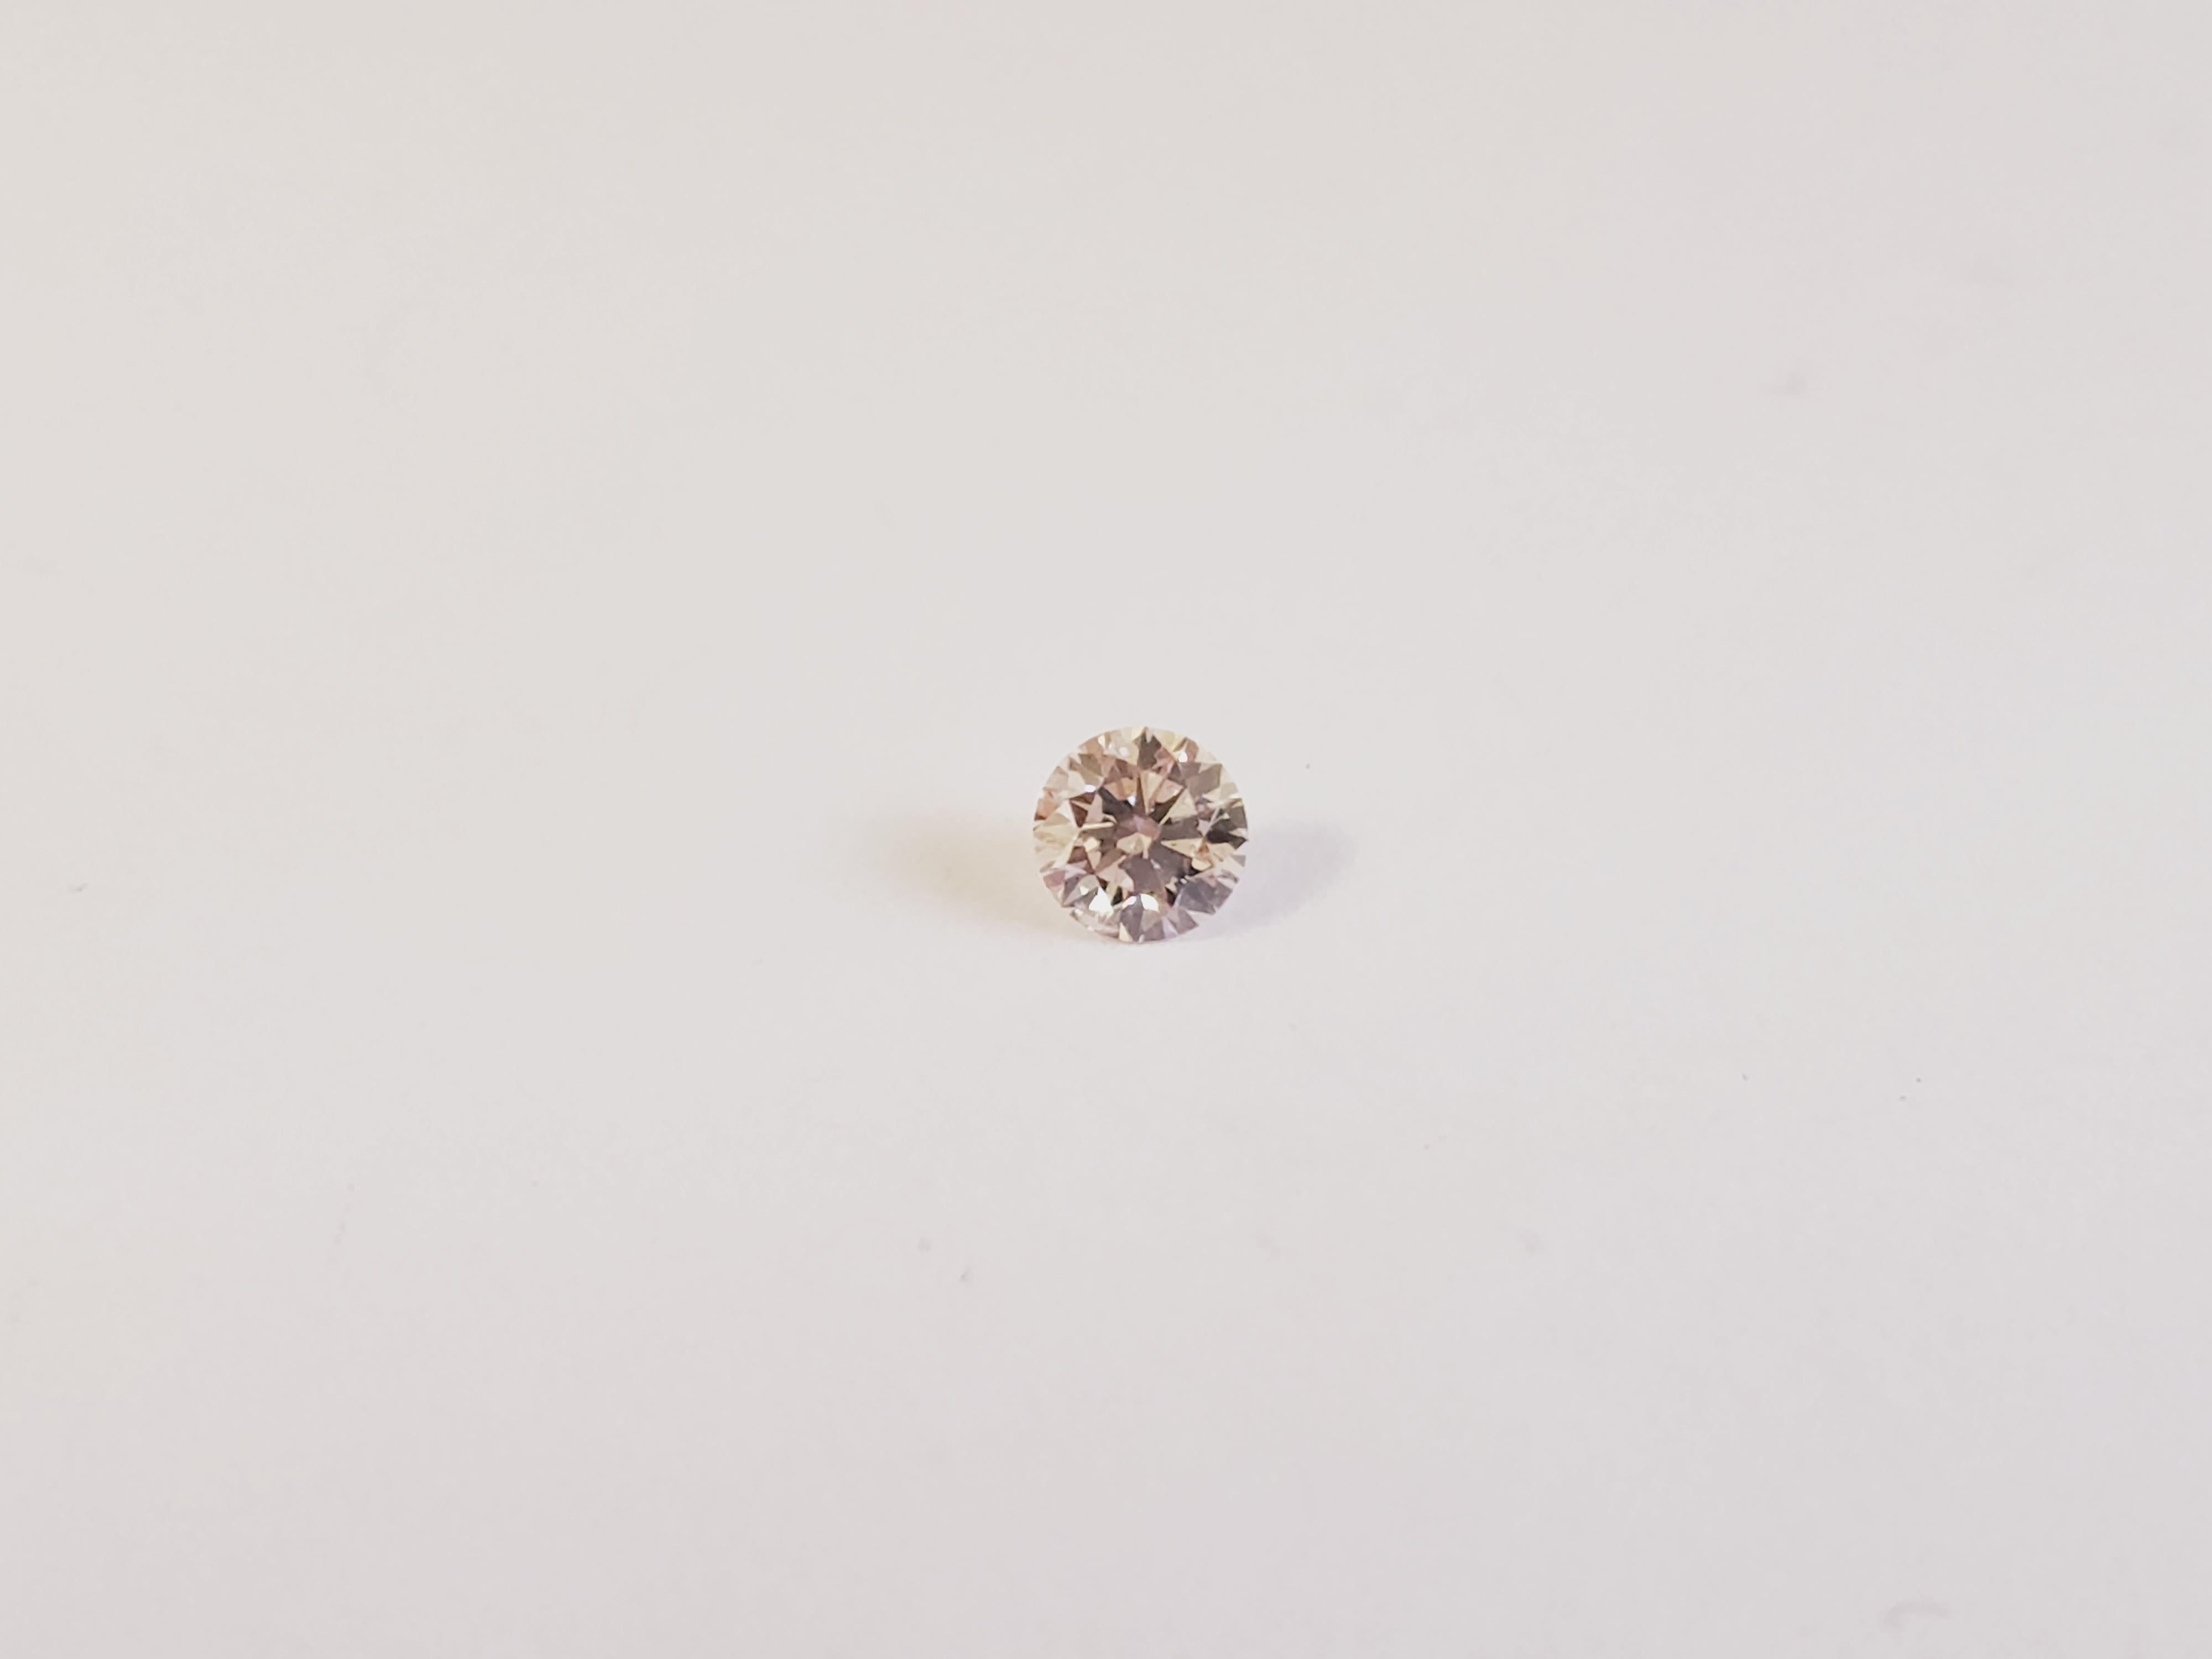 Argyle 0.16 Carat Natural Pink Champagne Round Shape Loose Diamond. Argyle with inscription on the diamond.

2020: Closure of the Argyle mine On 3 November 2020, mining at Argyle officially stopped after 37 years of operations.
It's a great